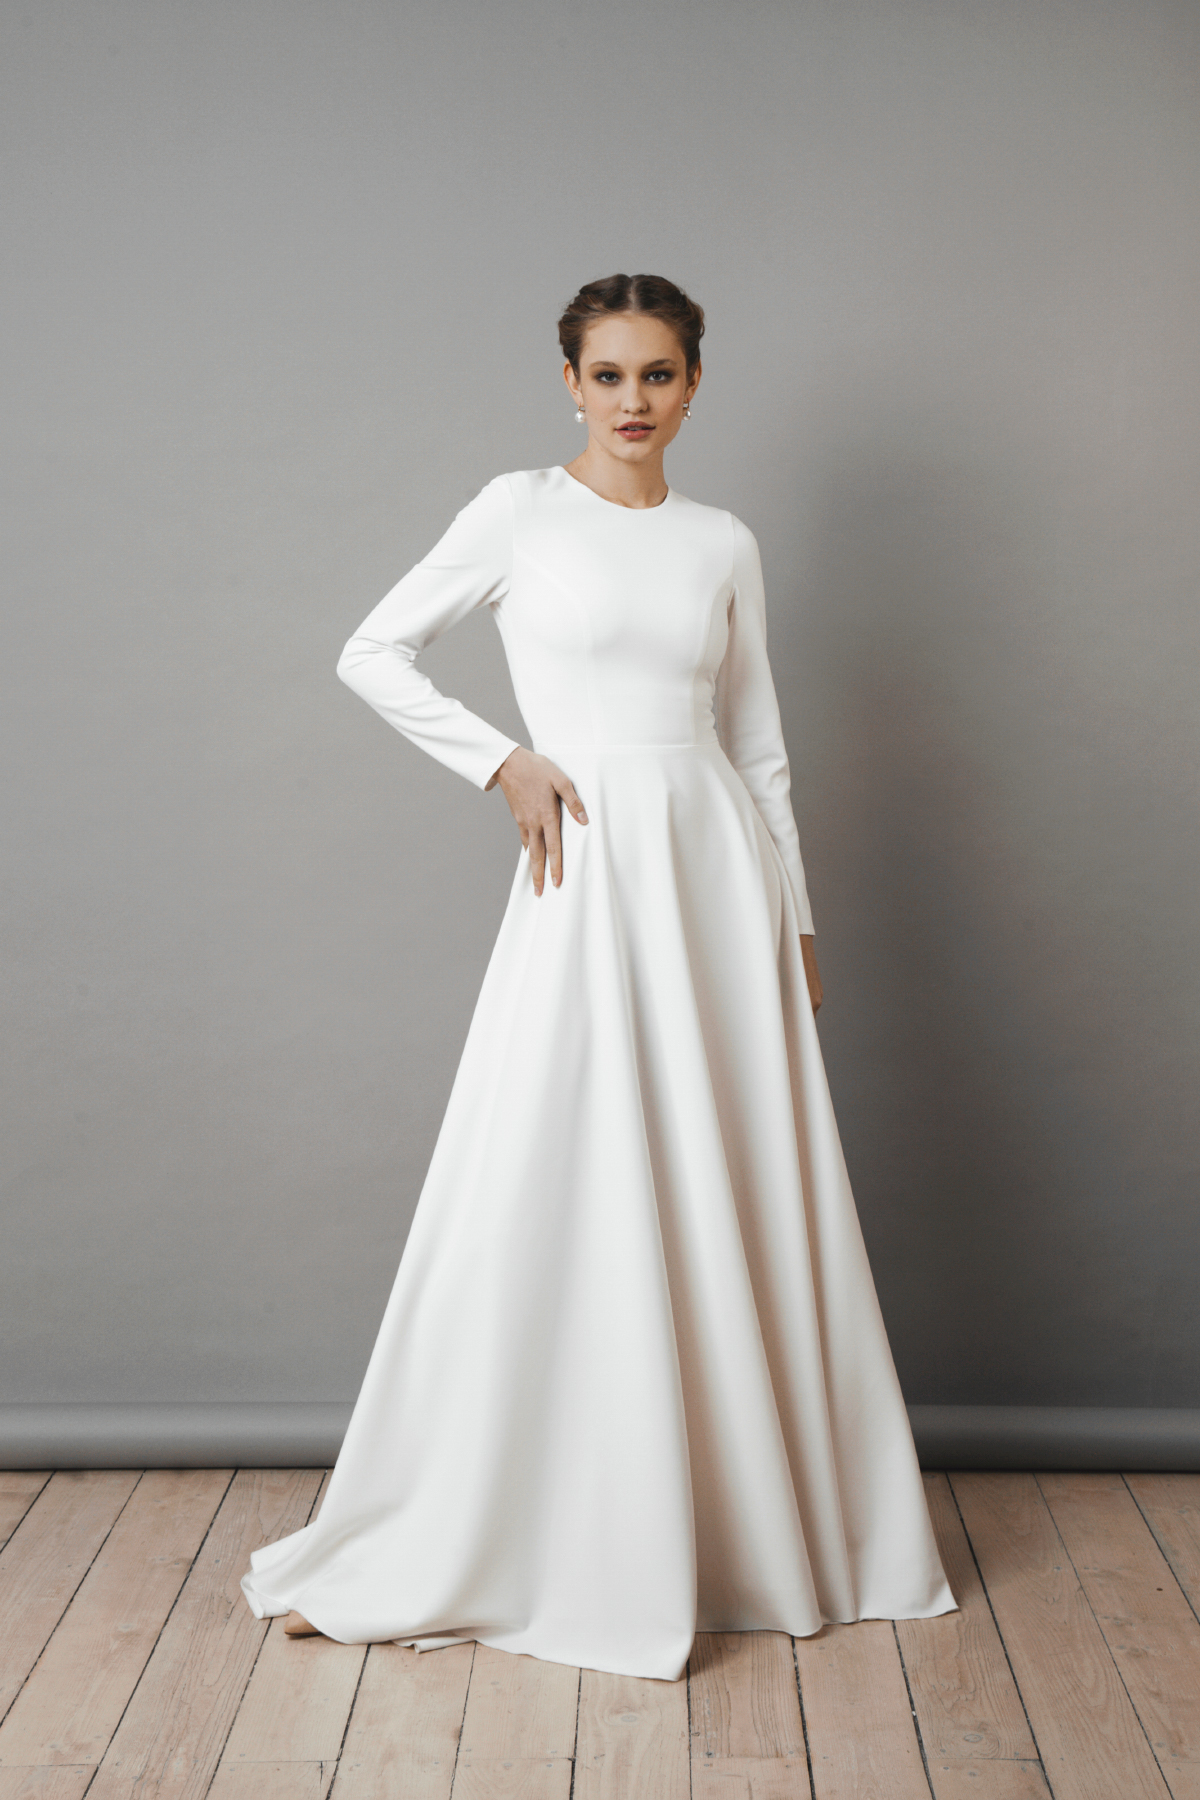 5 Simple Wedding Dresses For Chic Brides